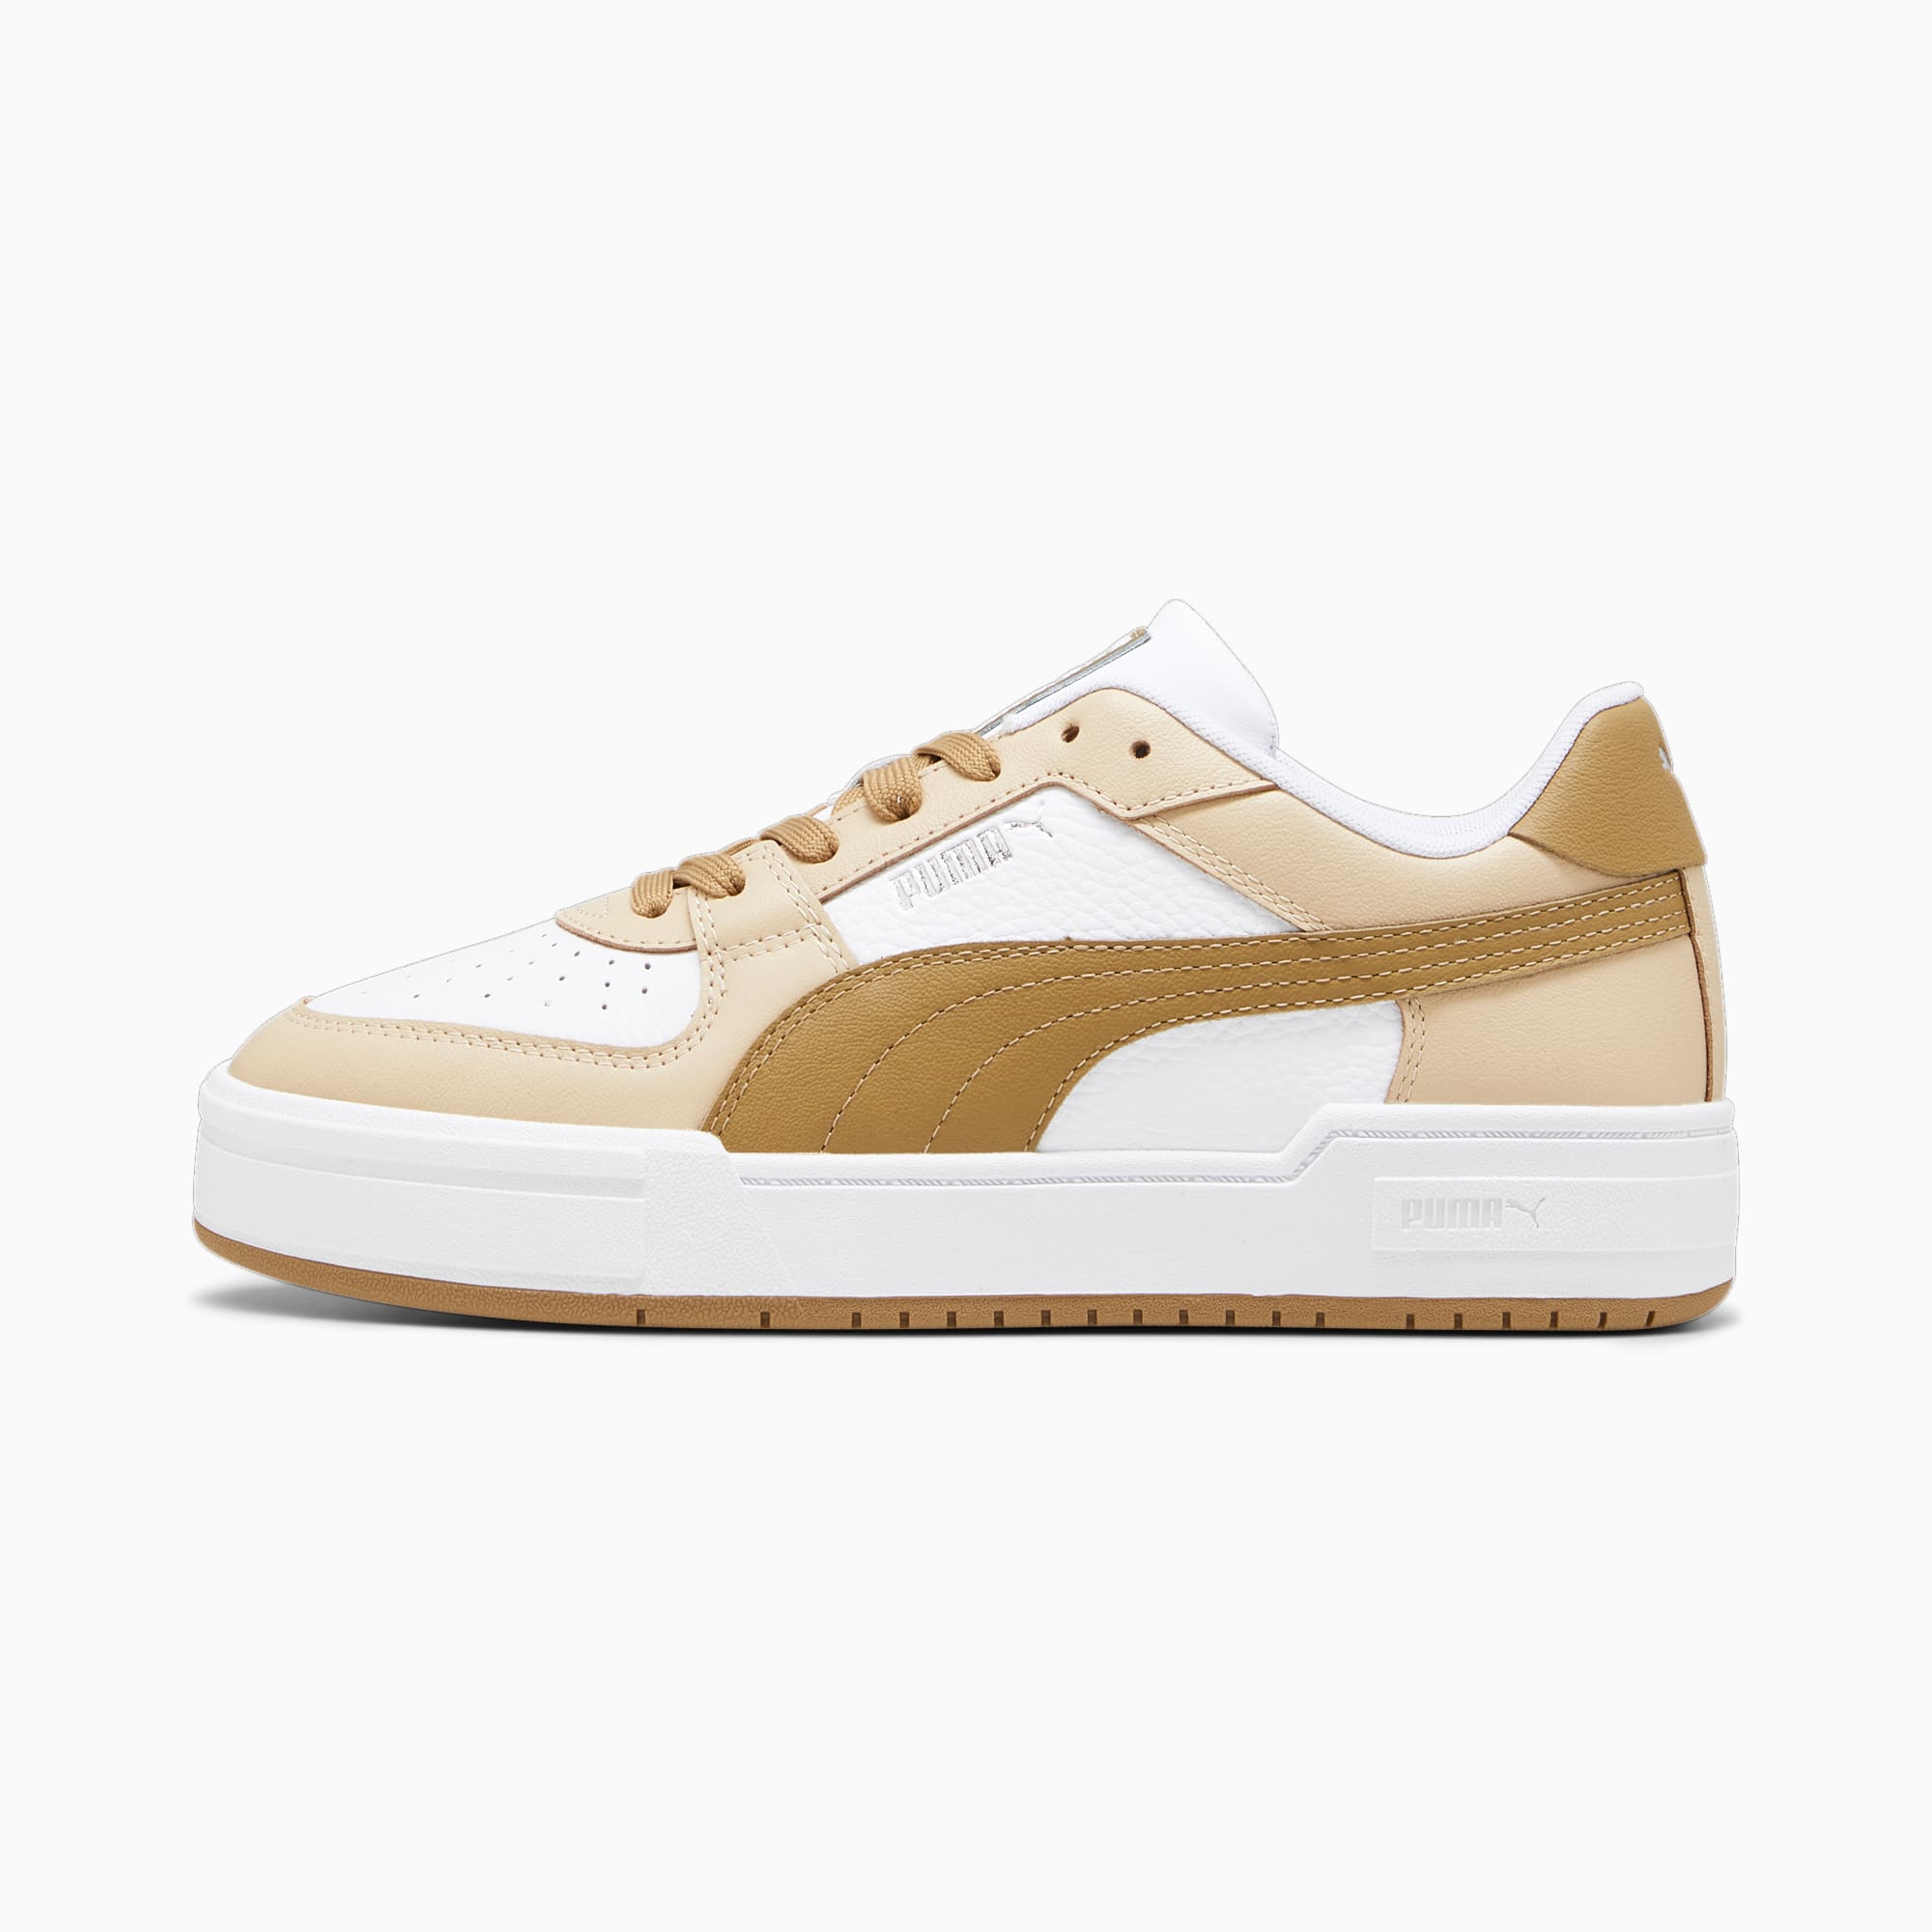 Women's PUMA Ca Pro Classic Trainers, White/Granola/Toasted, Size 36, Shoes